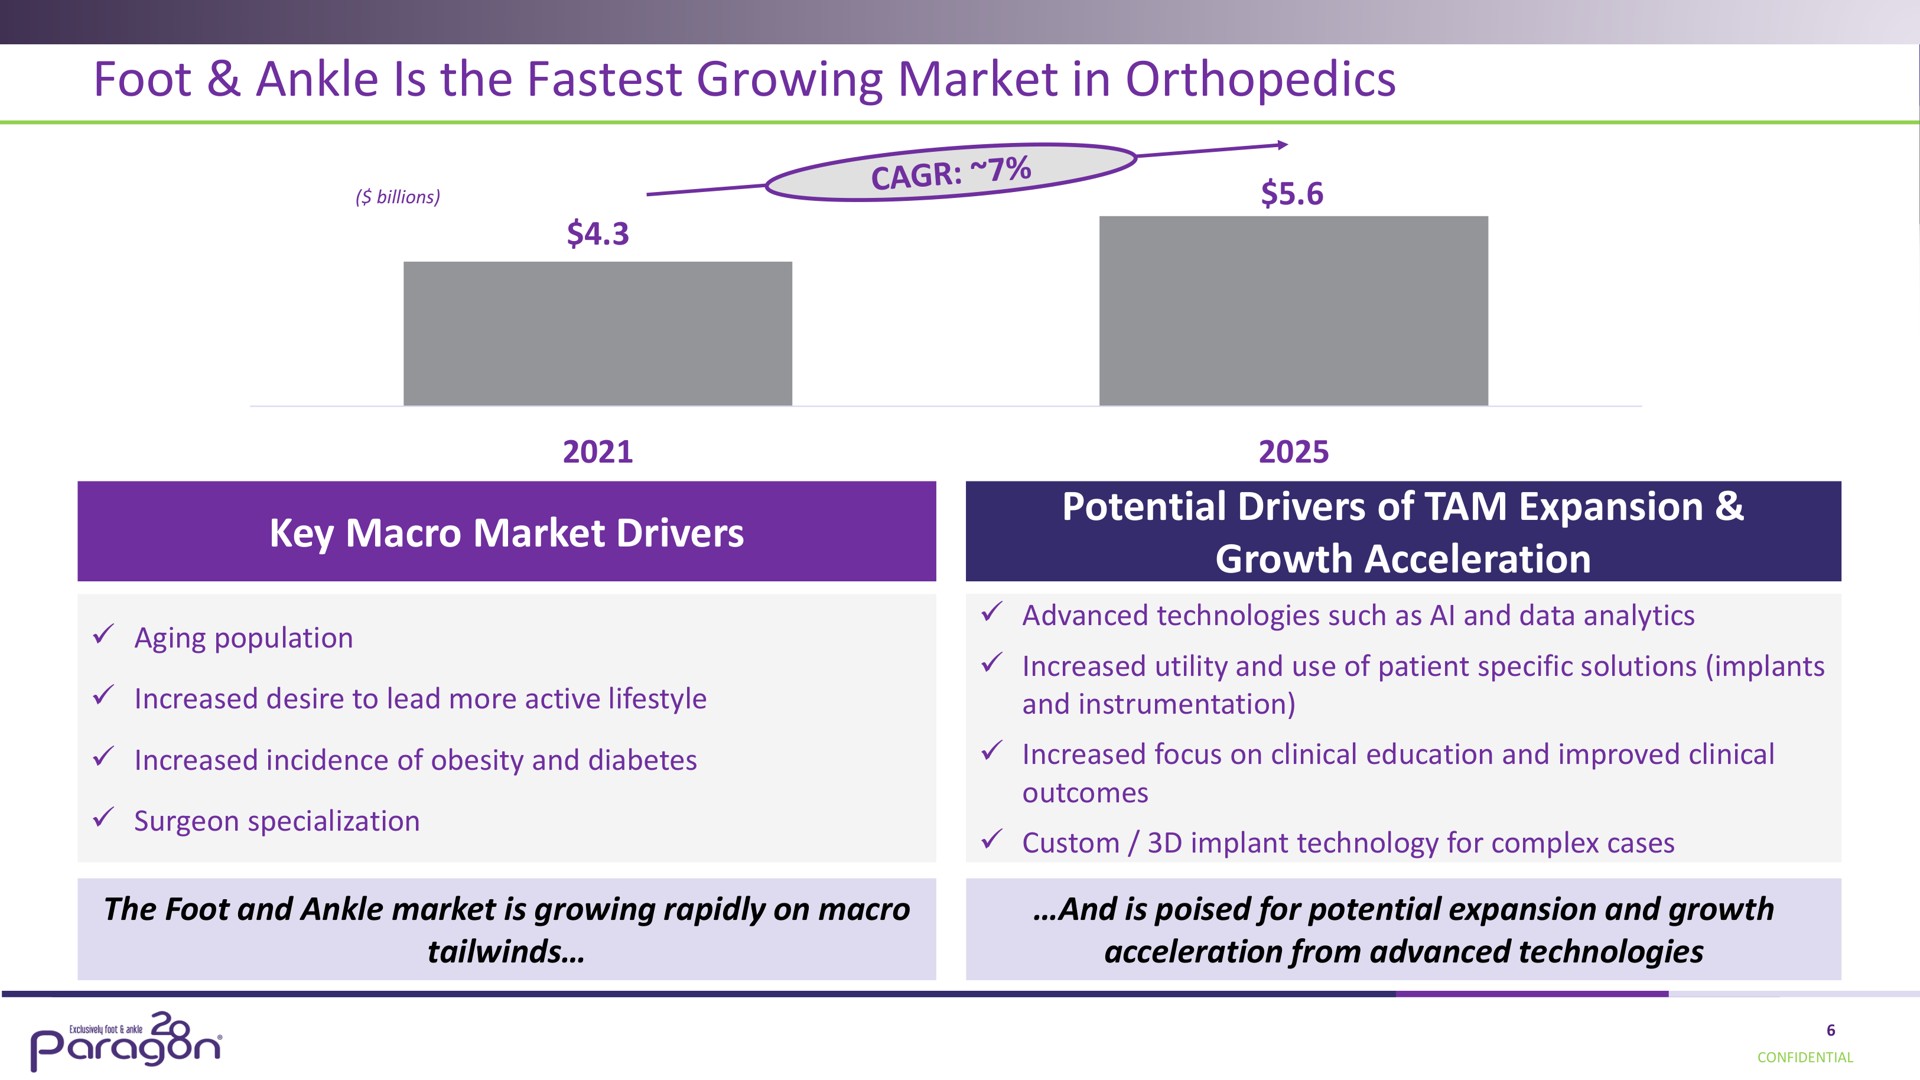 foot ankle is the growing market in orthopedics a key macro drivers me emss | Paragon28